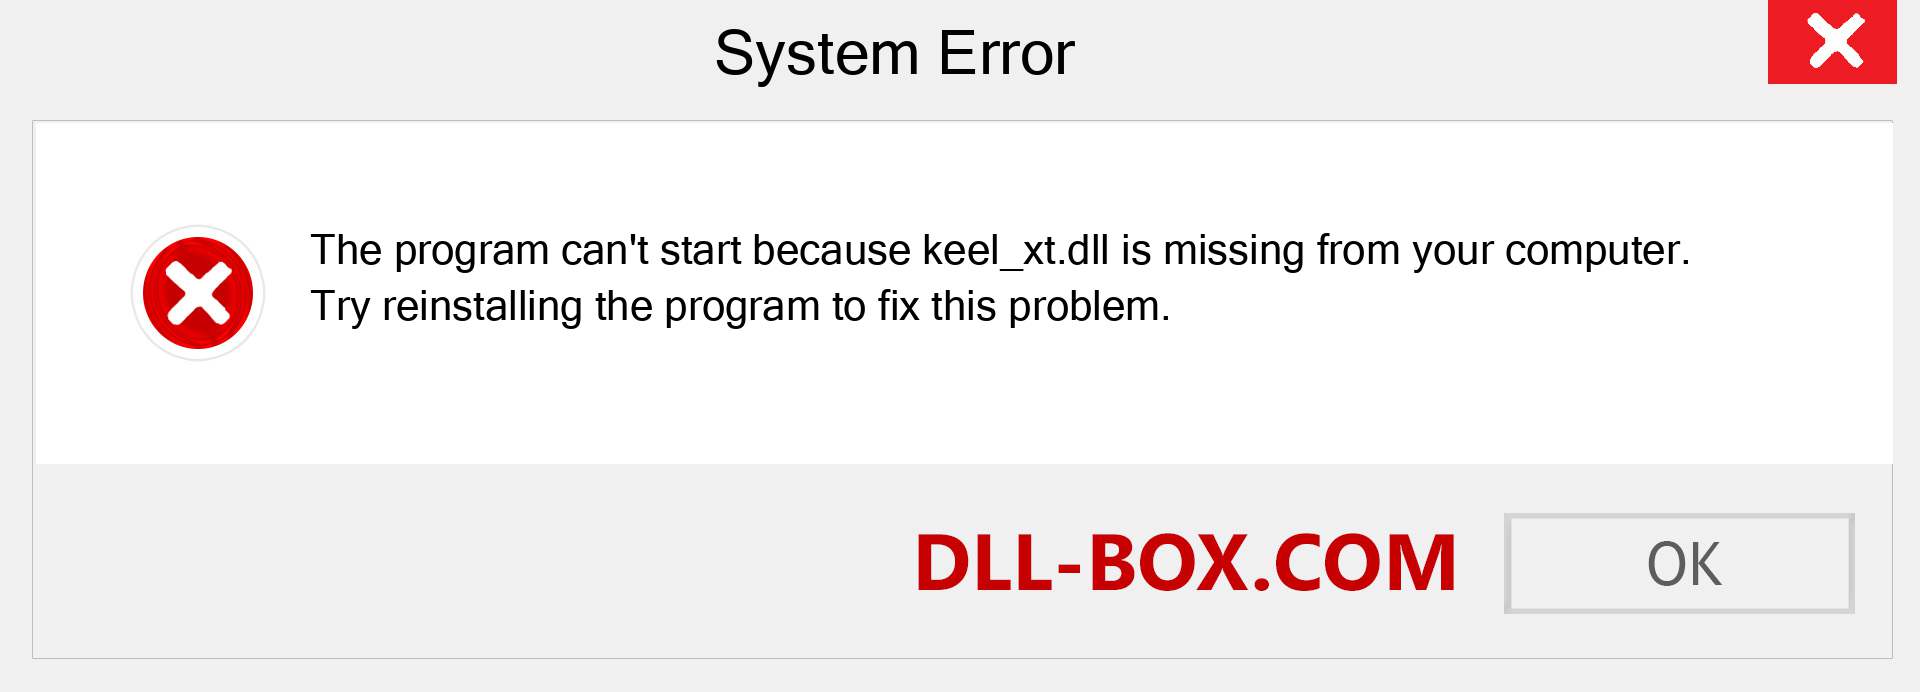  keel_xt.dll file is missing?. Download for Windows 7, 8, 10 - Fix  keel_xt dll Missing Error on Windows, photos, images